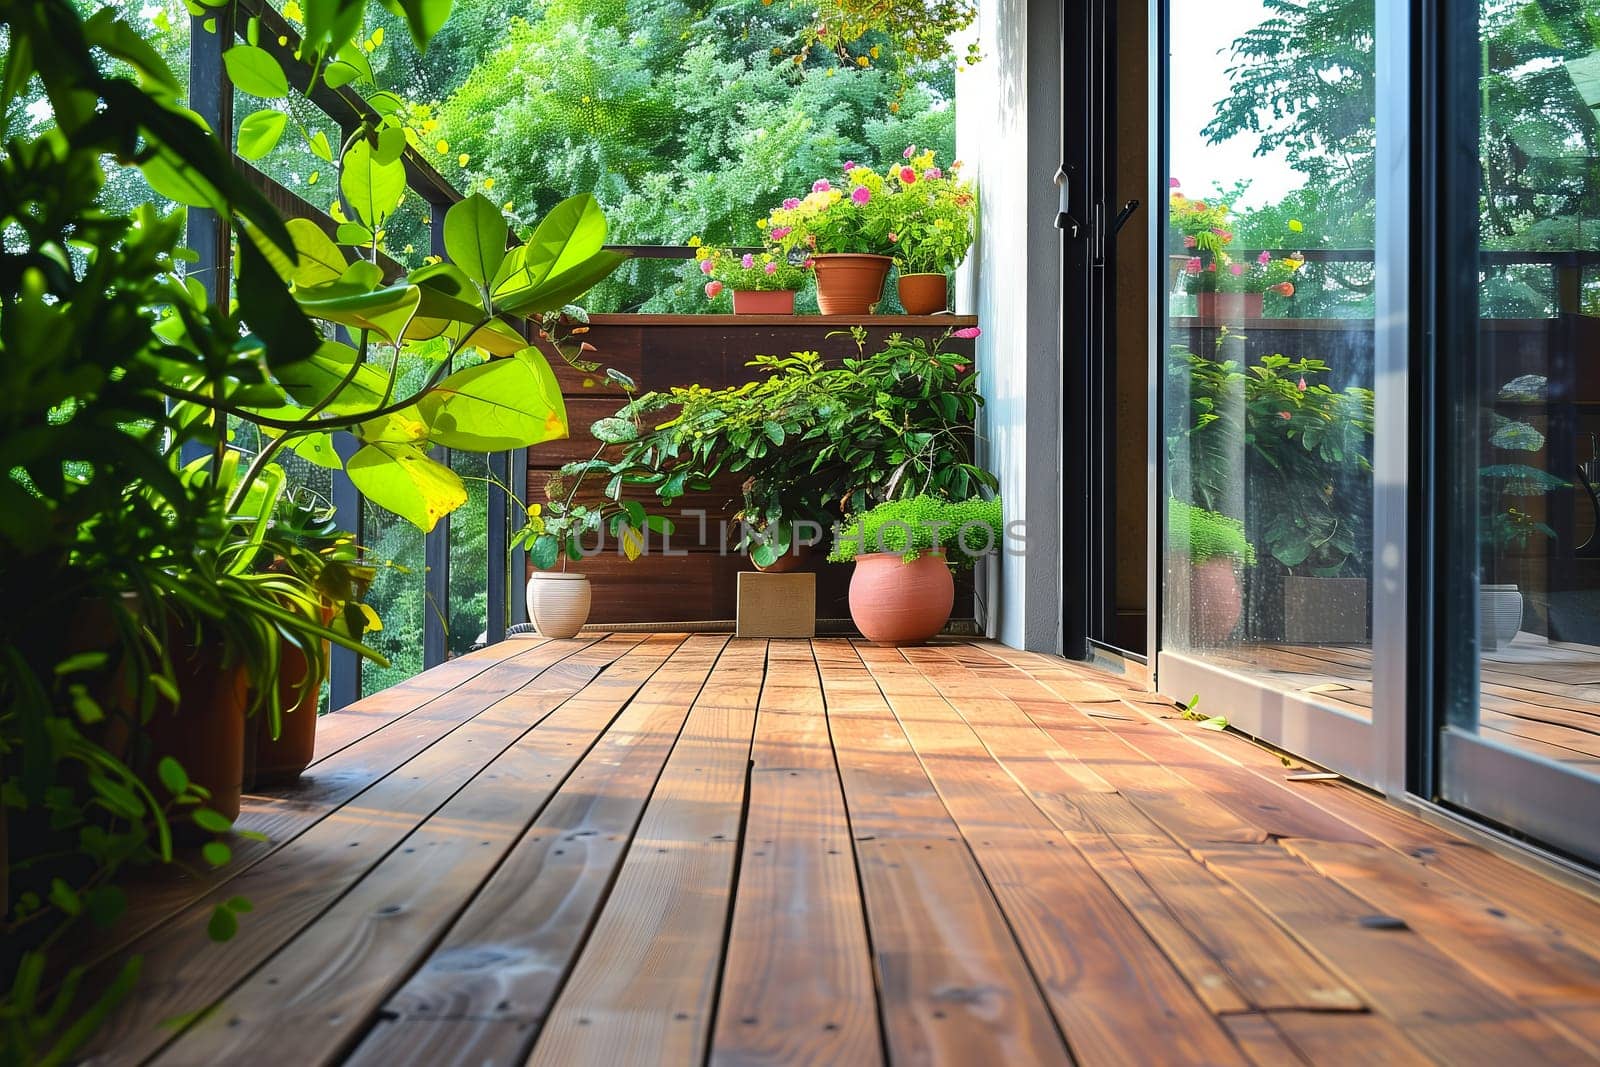 A wooden deck adorned with potted plants complements the sliding glass doors of the house. The natural fixtures bring warmth to the building